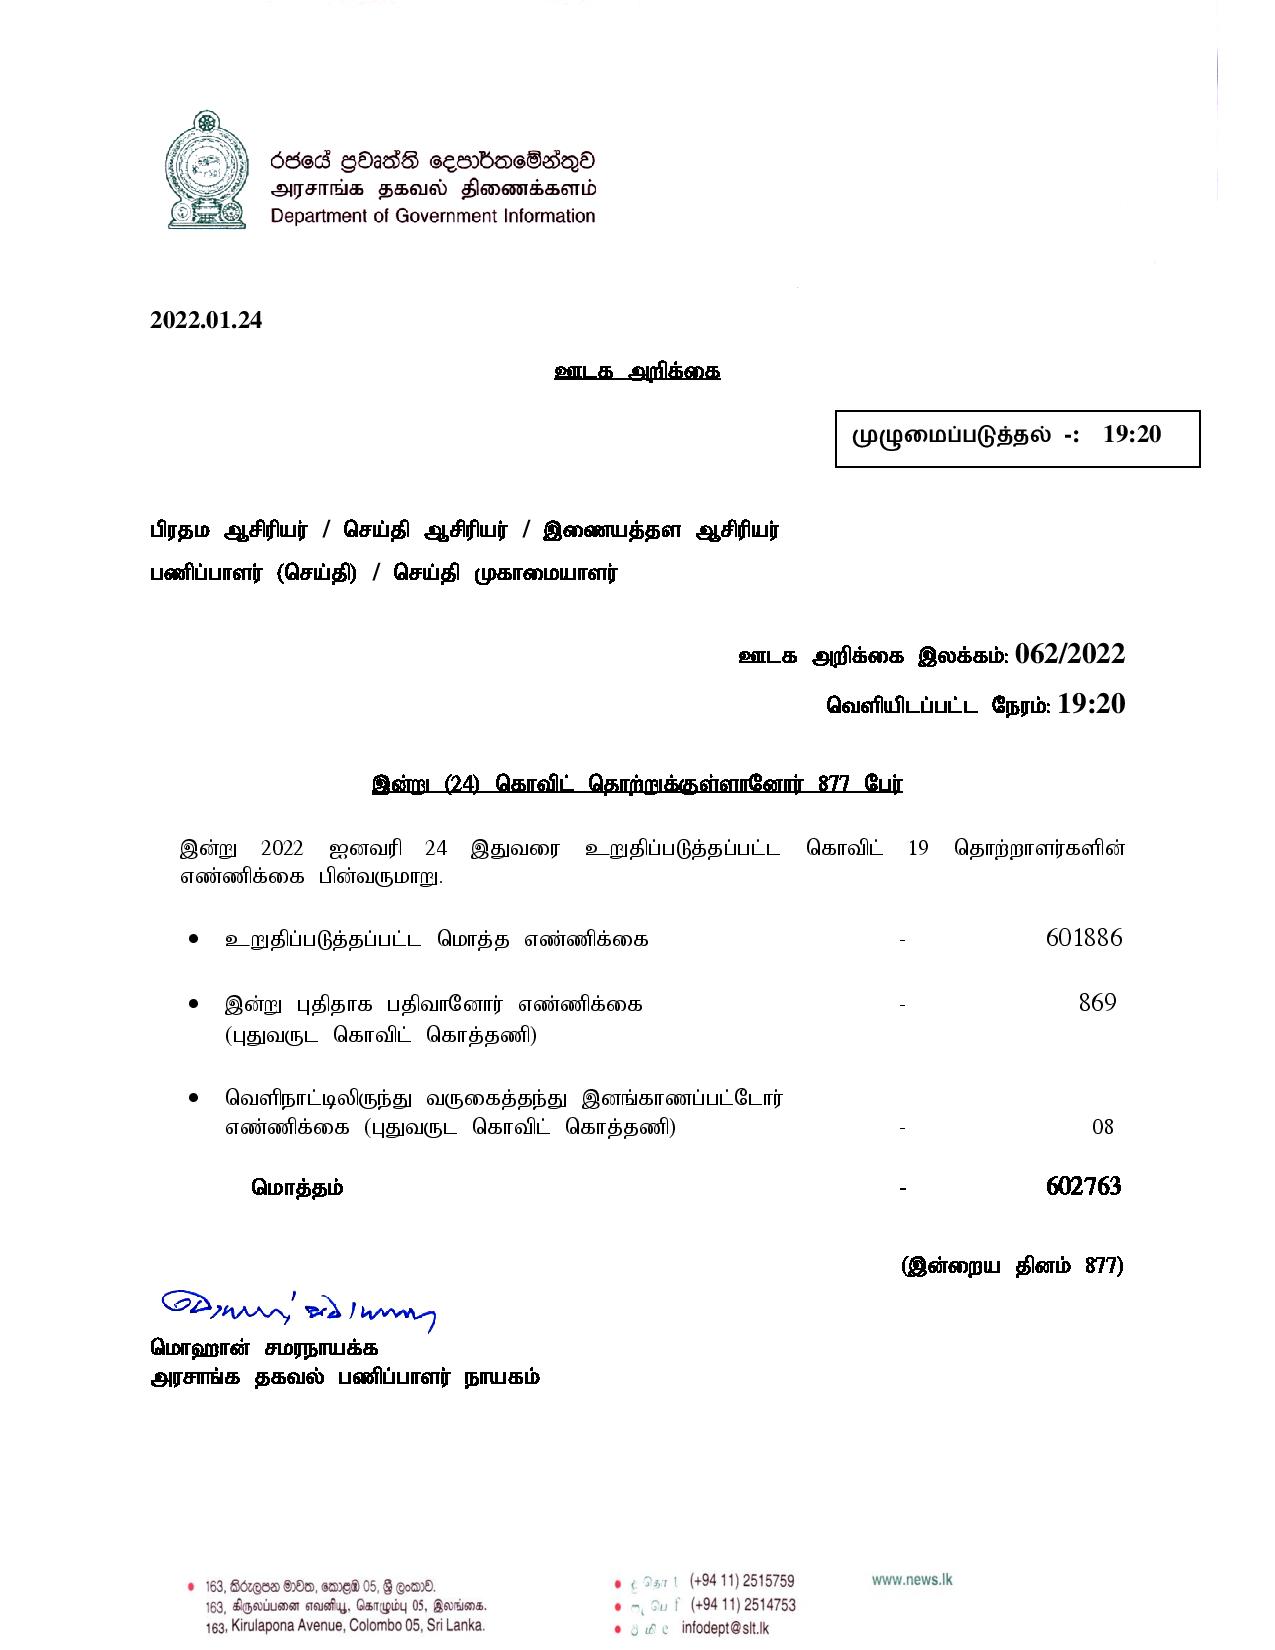 Press Release 62 Tamil page 001